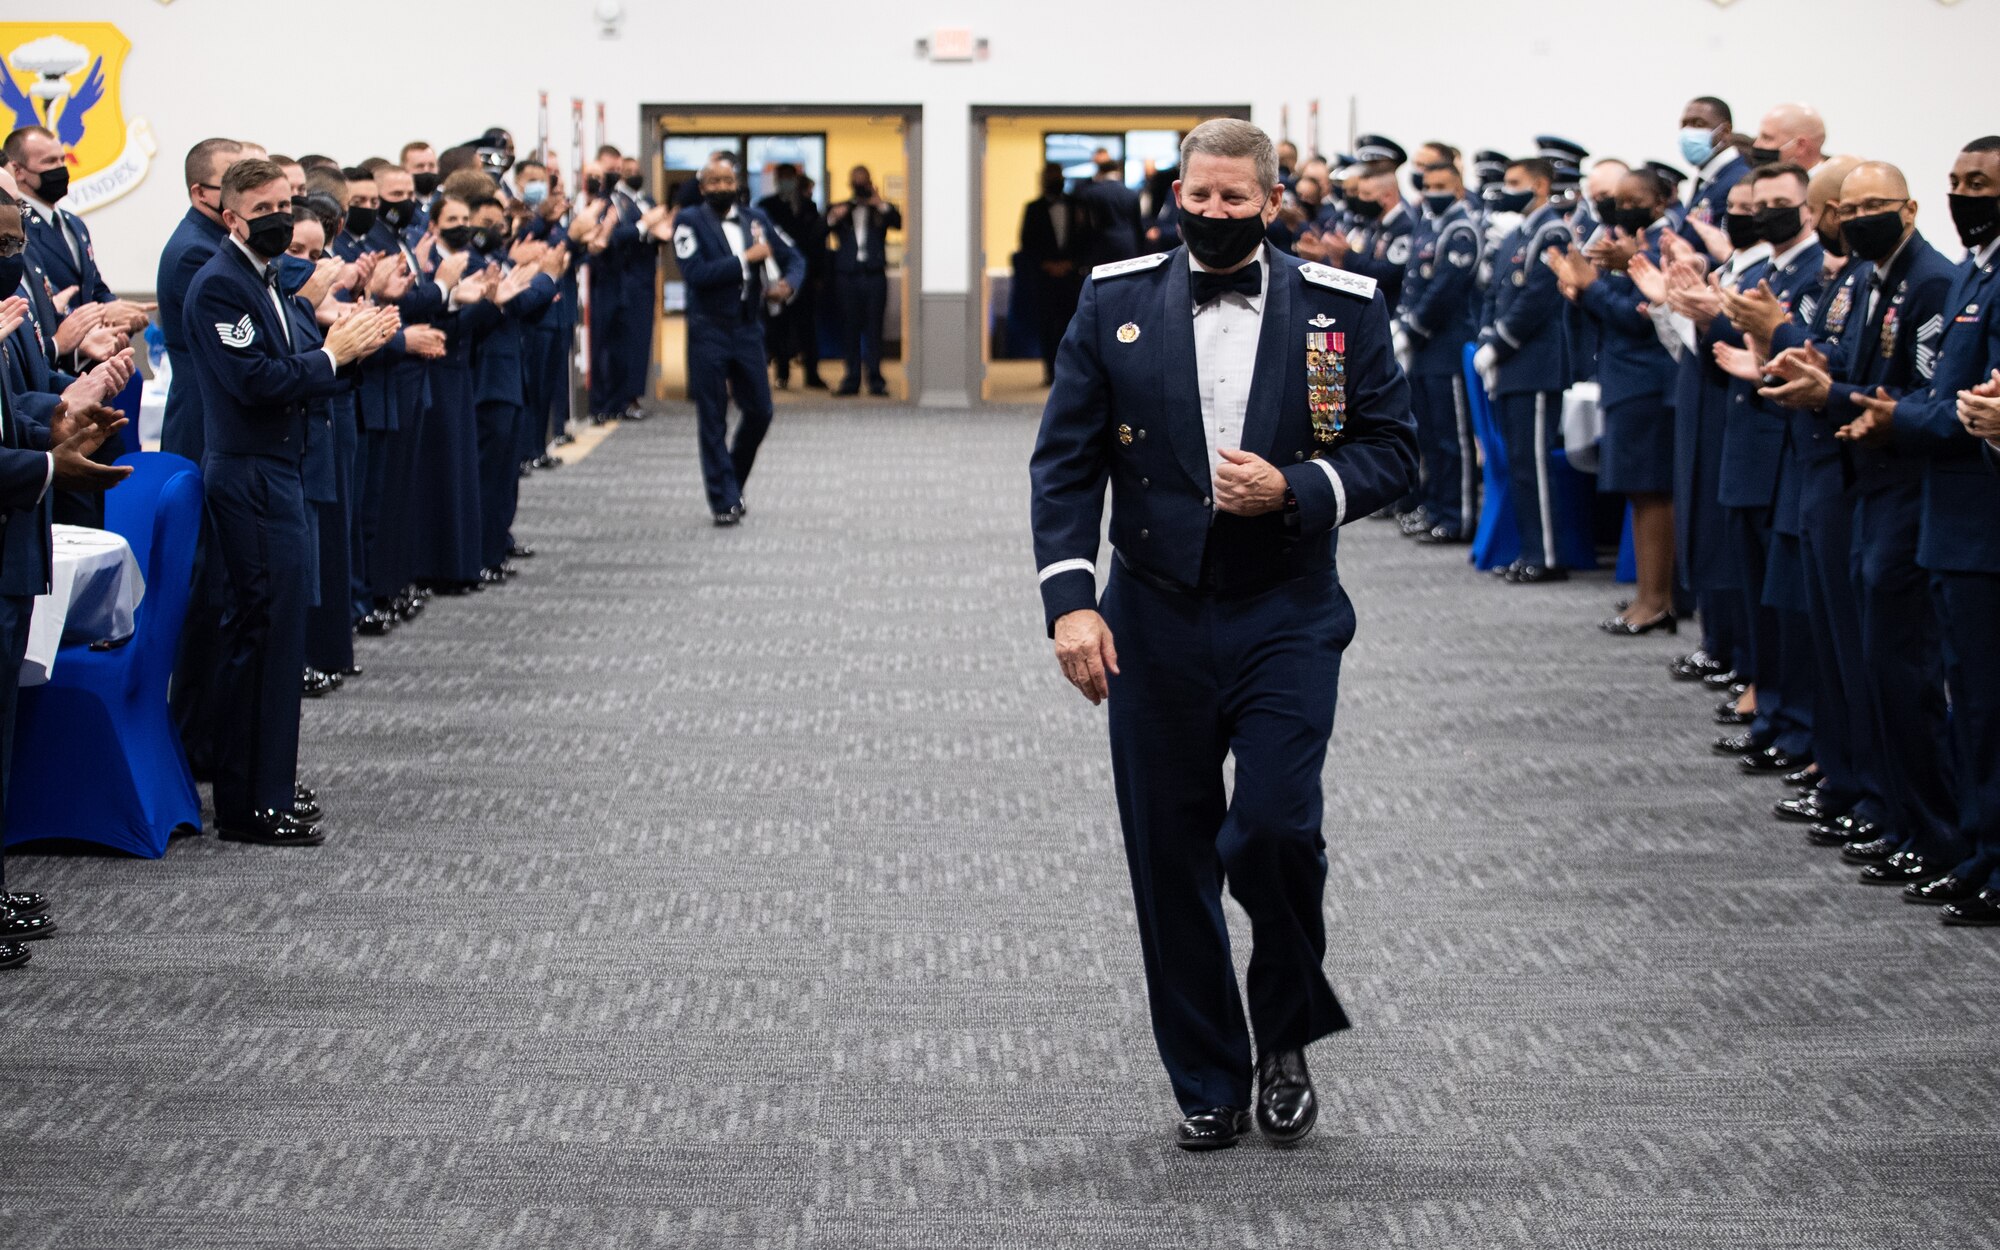 Retired Gen. Robin Rand, former Air Force Global Strike Command commander, is welcomed with a standing ovation during an Order of the Sword ceremony at Barksdale Air Force Base, Louisiana, April 23, 2021. The Order of the Sword is an Air Force tradition in which members of the enlisted corps recognize and honor senior officers and civilians who have made significant contributions to the welfare and prestige of the enlisted corps. (U.S. Air Force photo by Airman 1st Class Jacob B. Wrightsman)